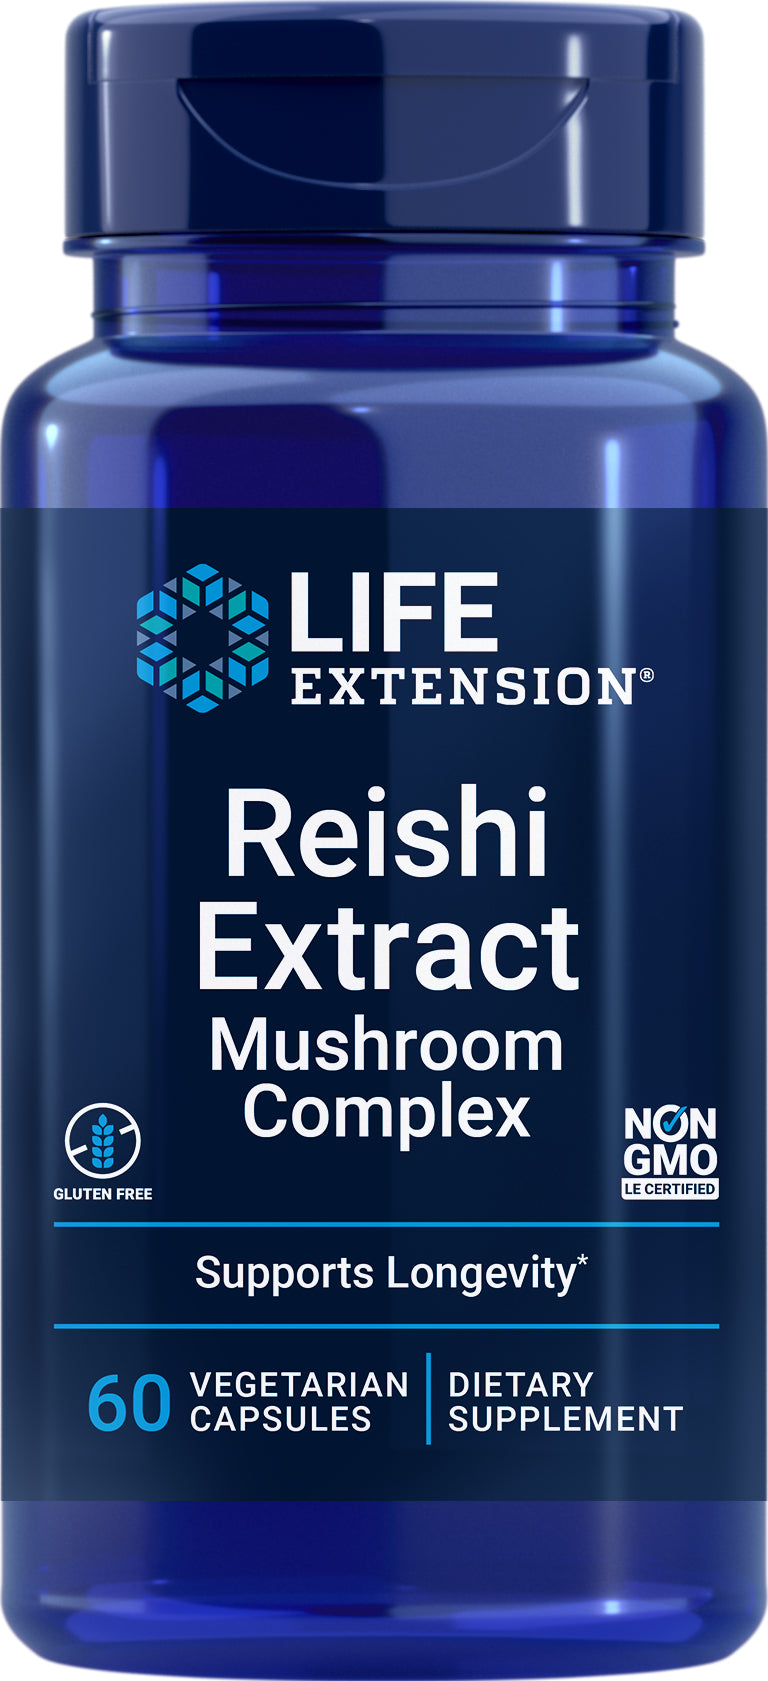 Reishi Extract Mushroom Complex 60 veg caps by Life Extension